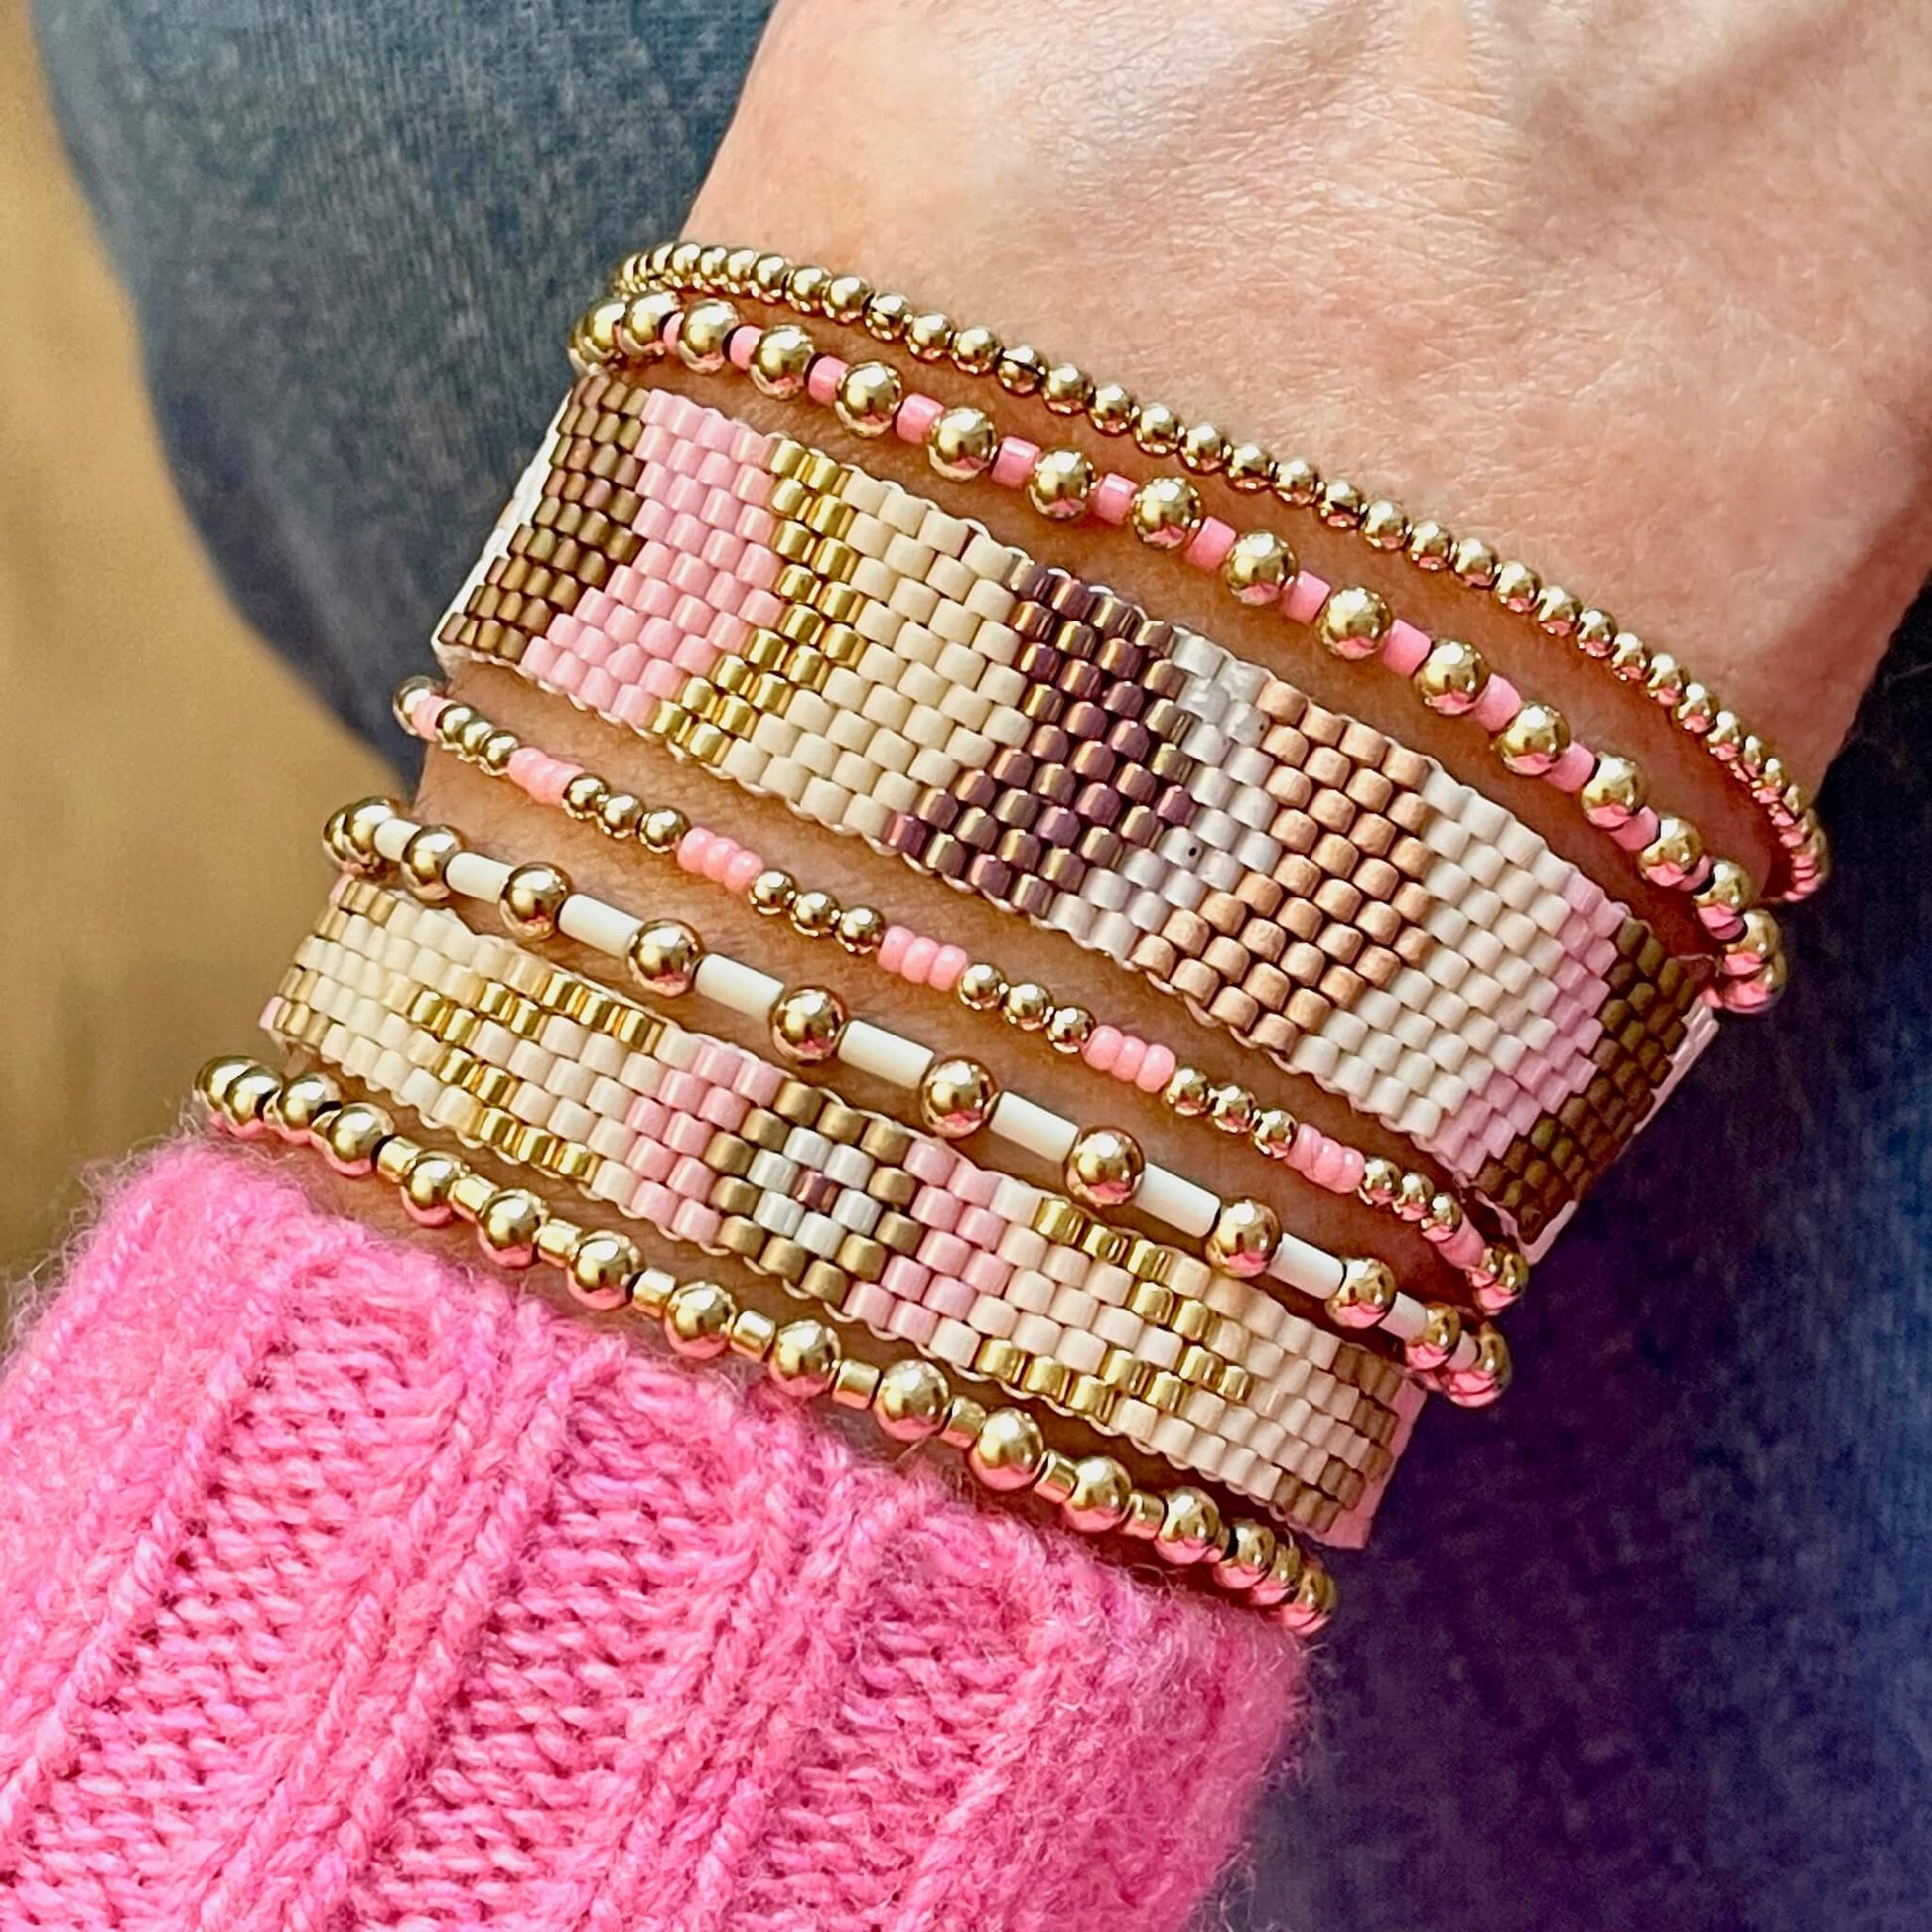 Gold bead bracelets and flat beaded bracelets. Trendy as stackable bracelets or individually. With pink beads.